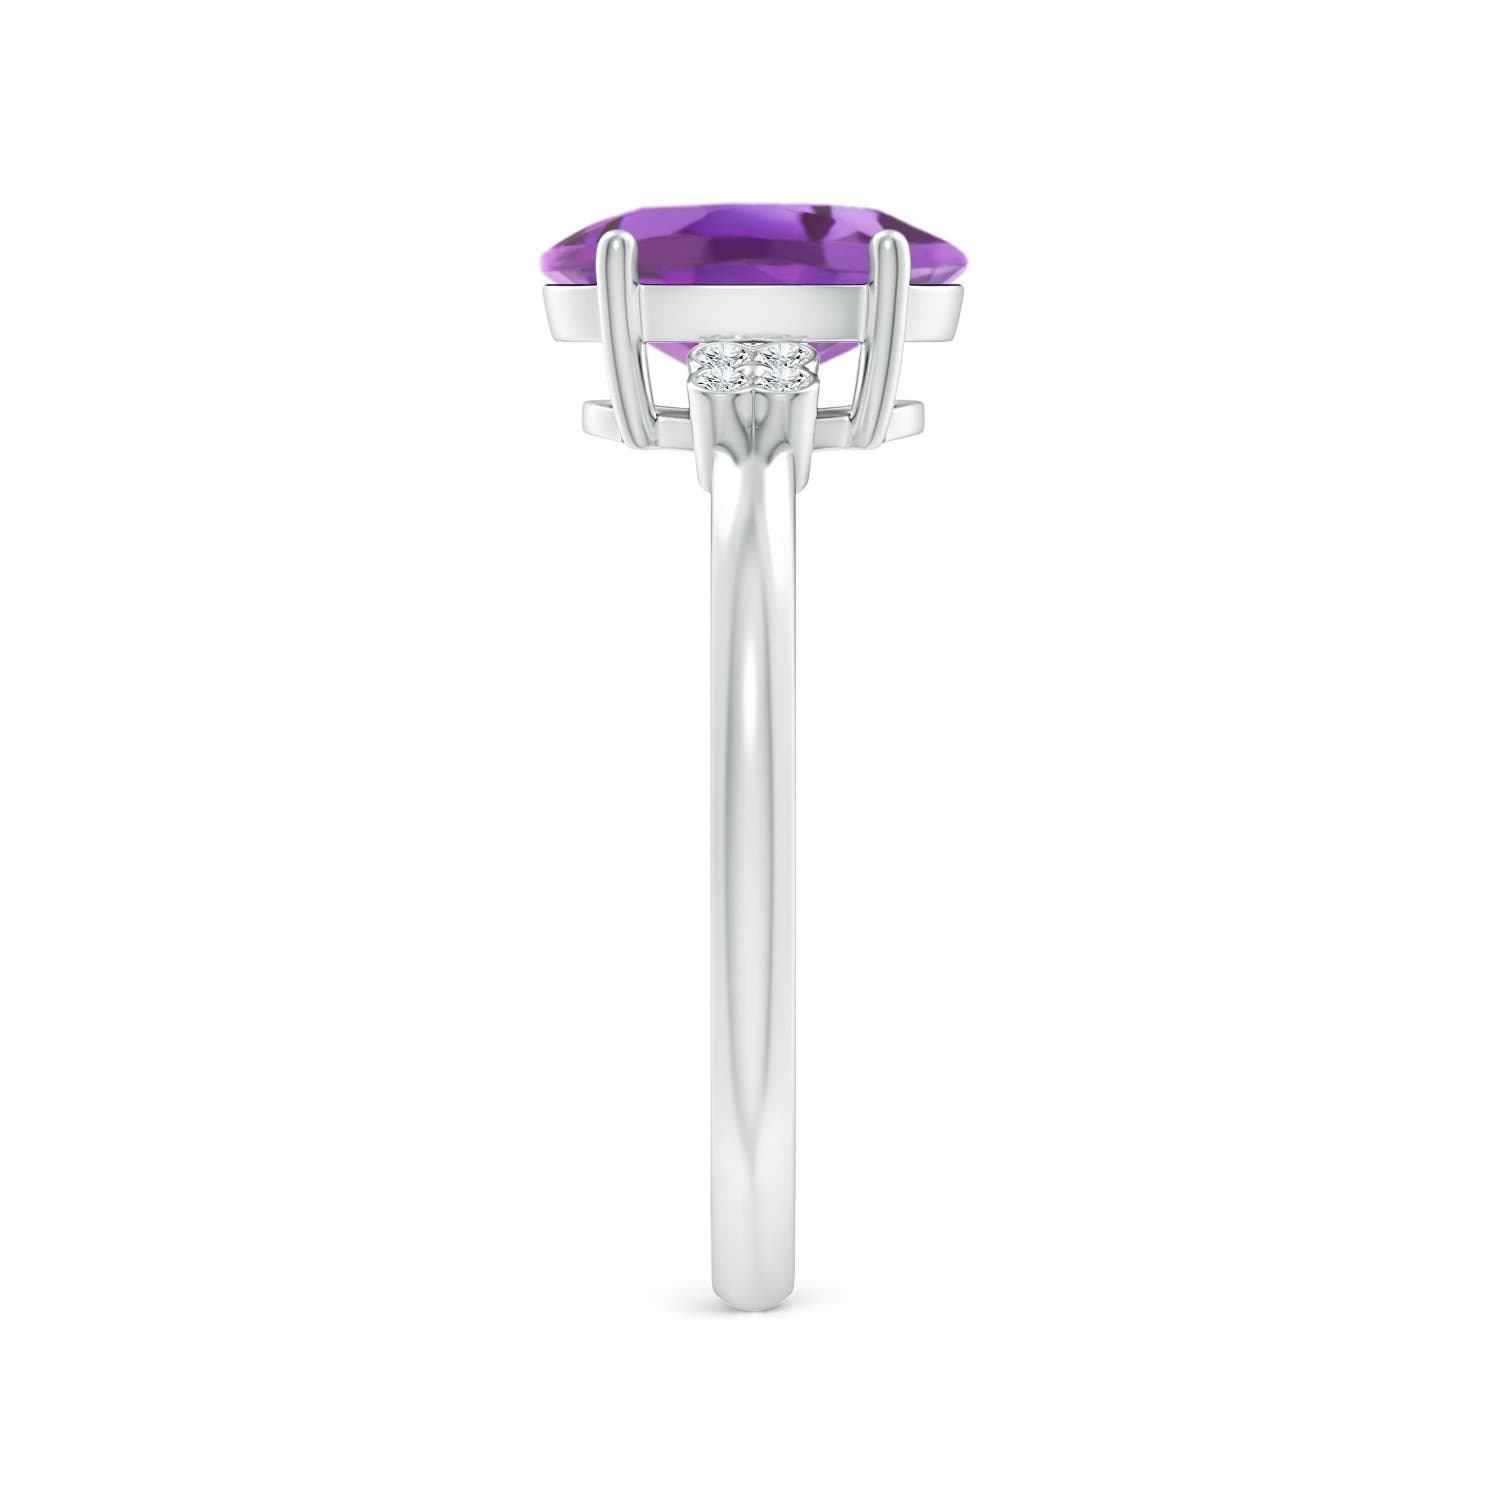 A- Amethyst / 1.66 CT / 14 KT White Gold